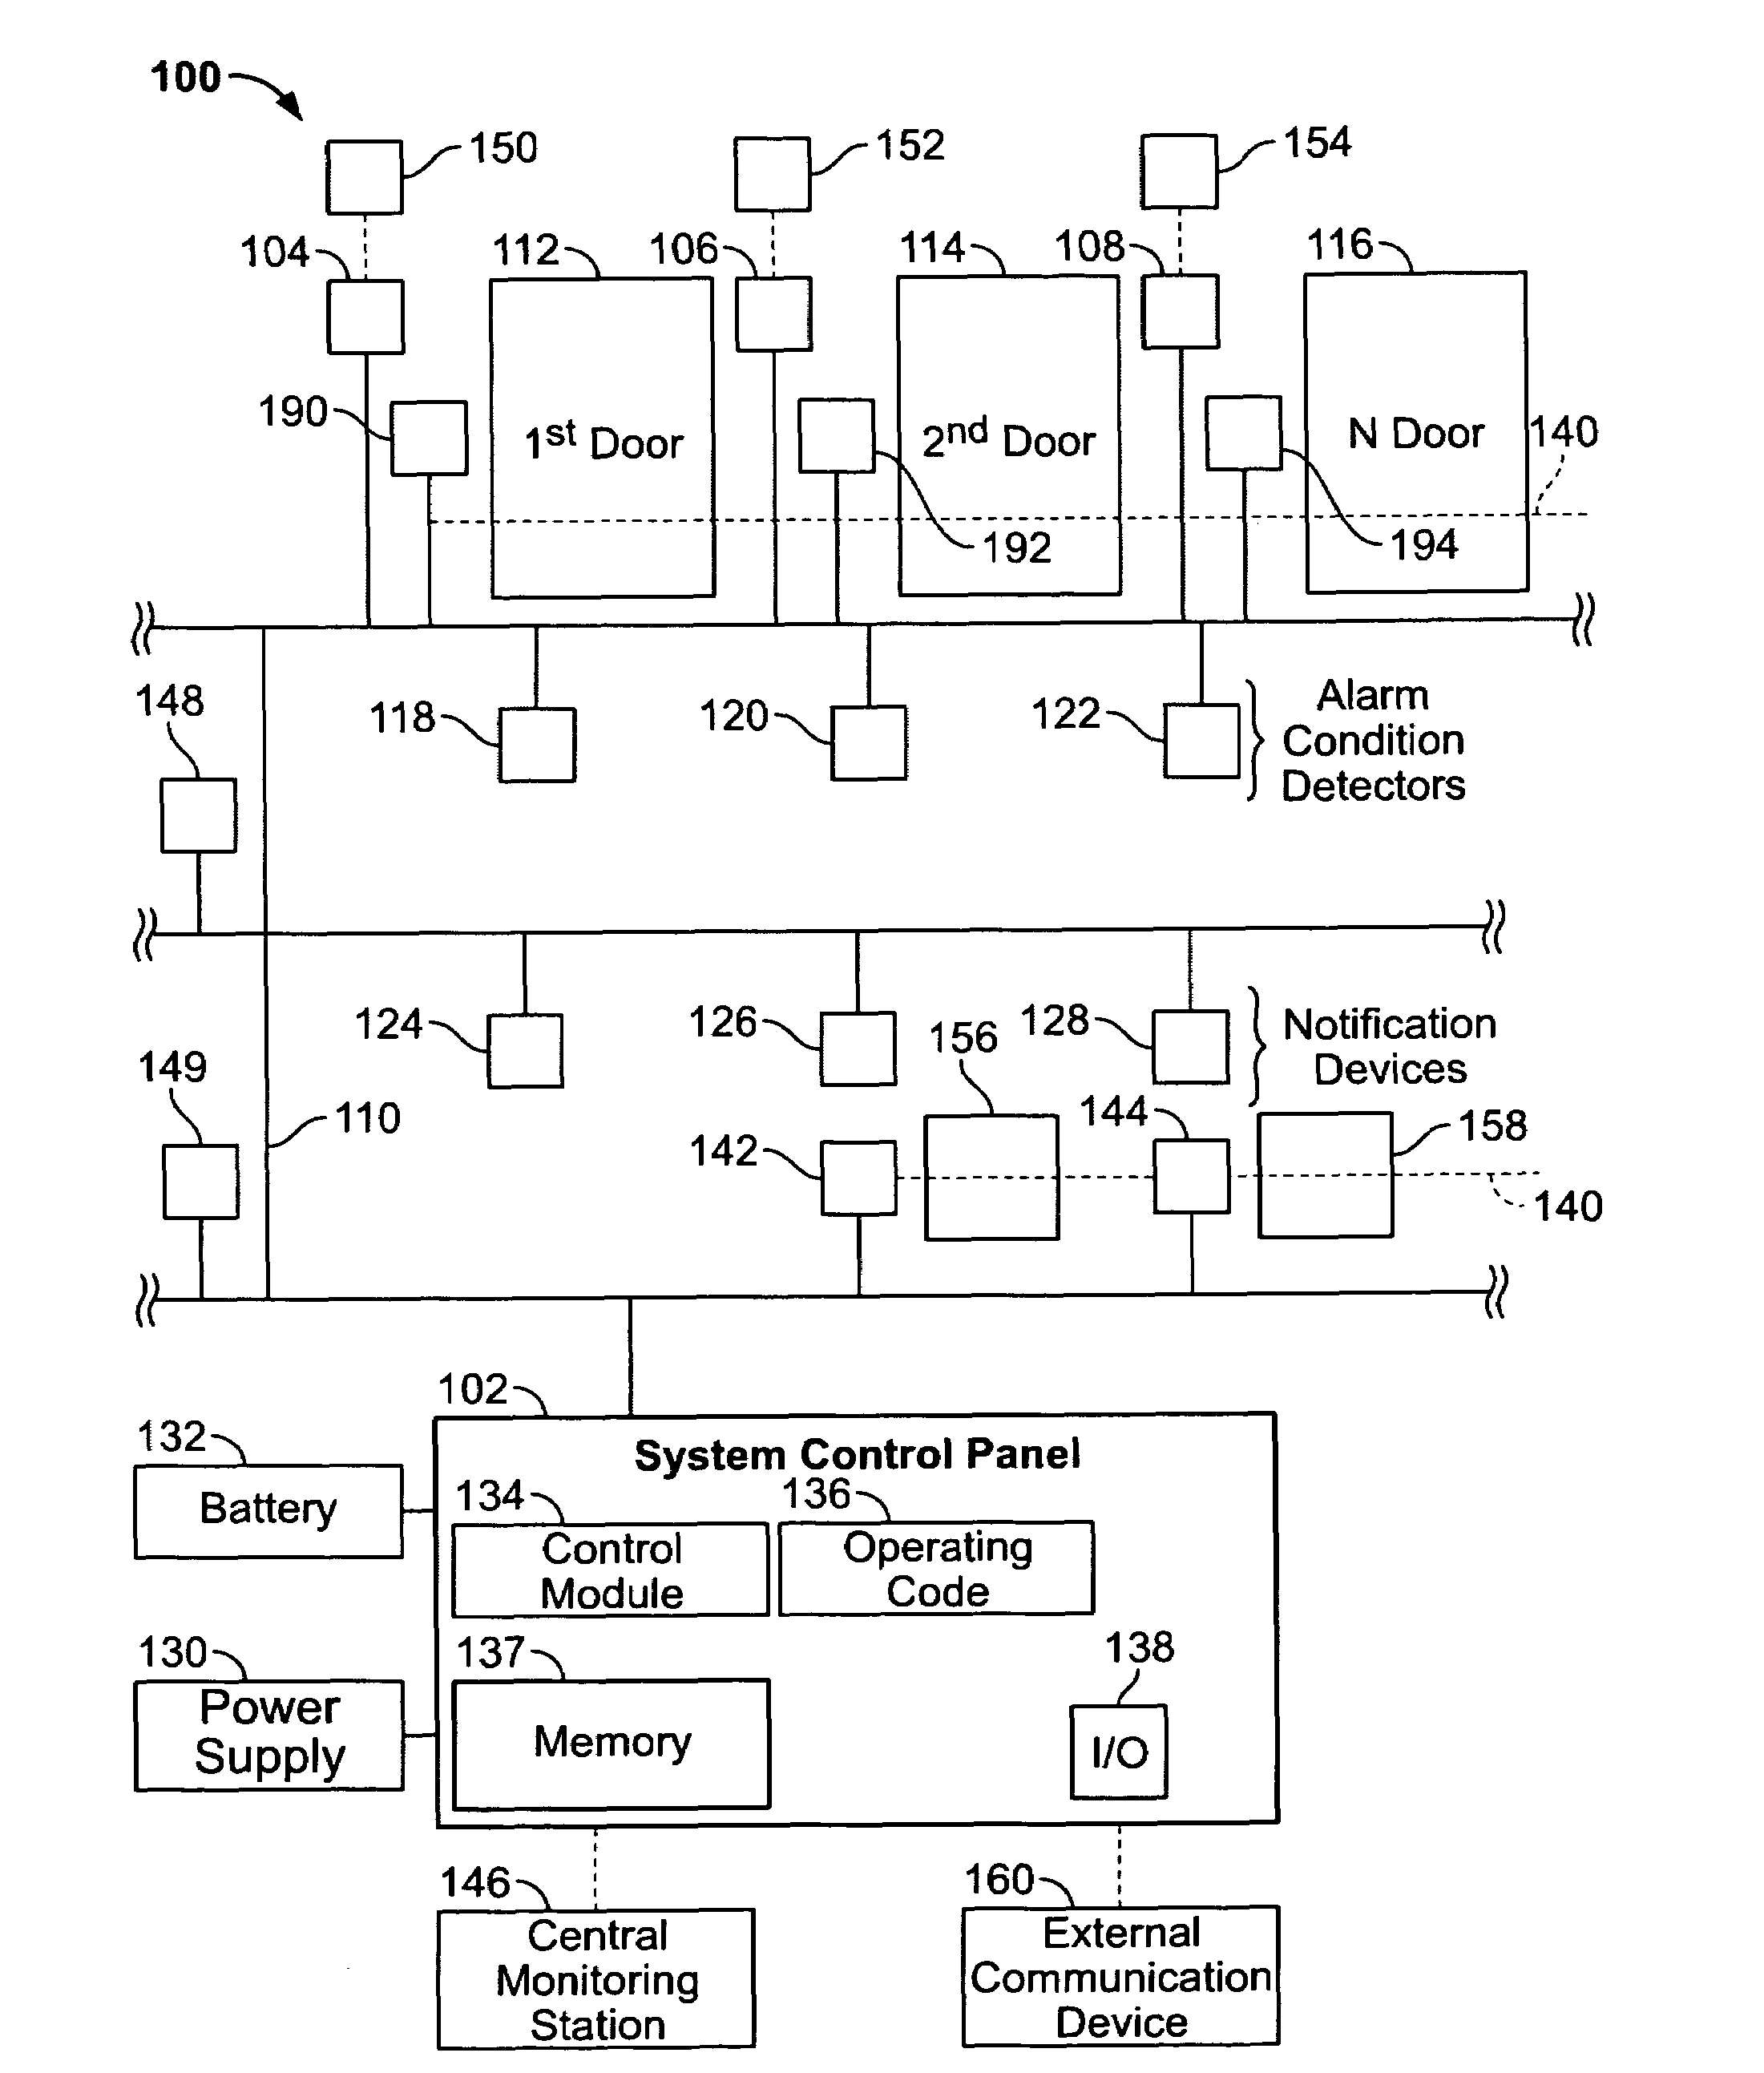 Method and apparatus for automatically disarming a security system